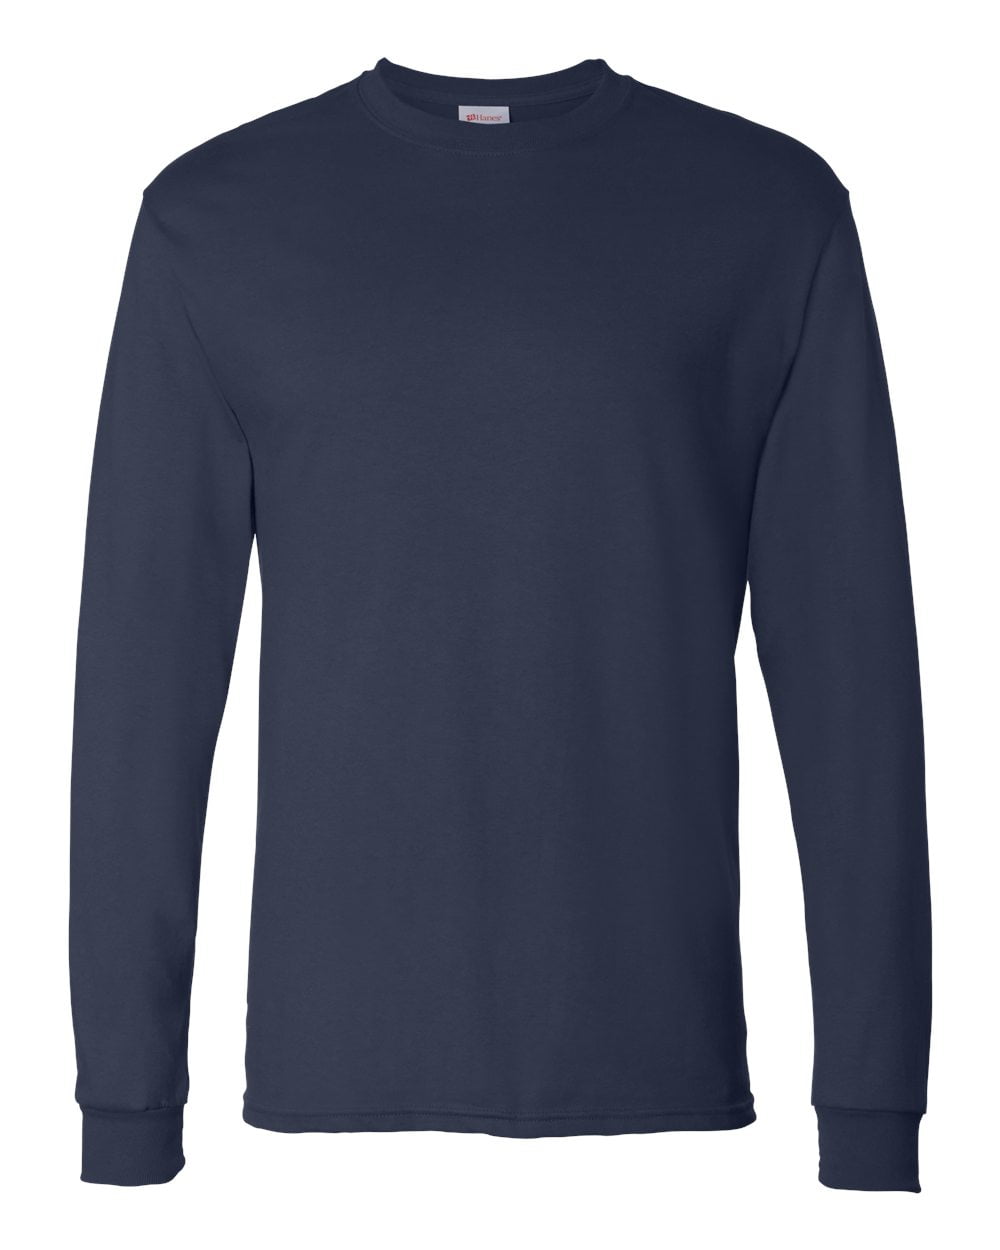 Details about   Hanes Men'S Long-Sleeve Comfortsoft T-Shirt Pack Of 4